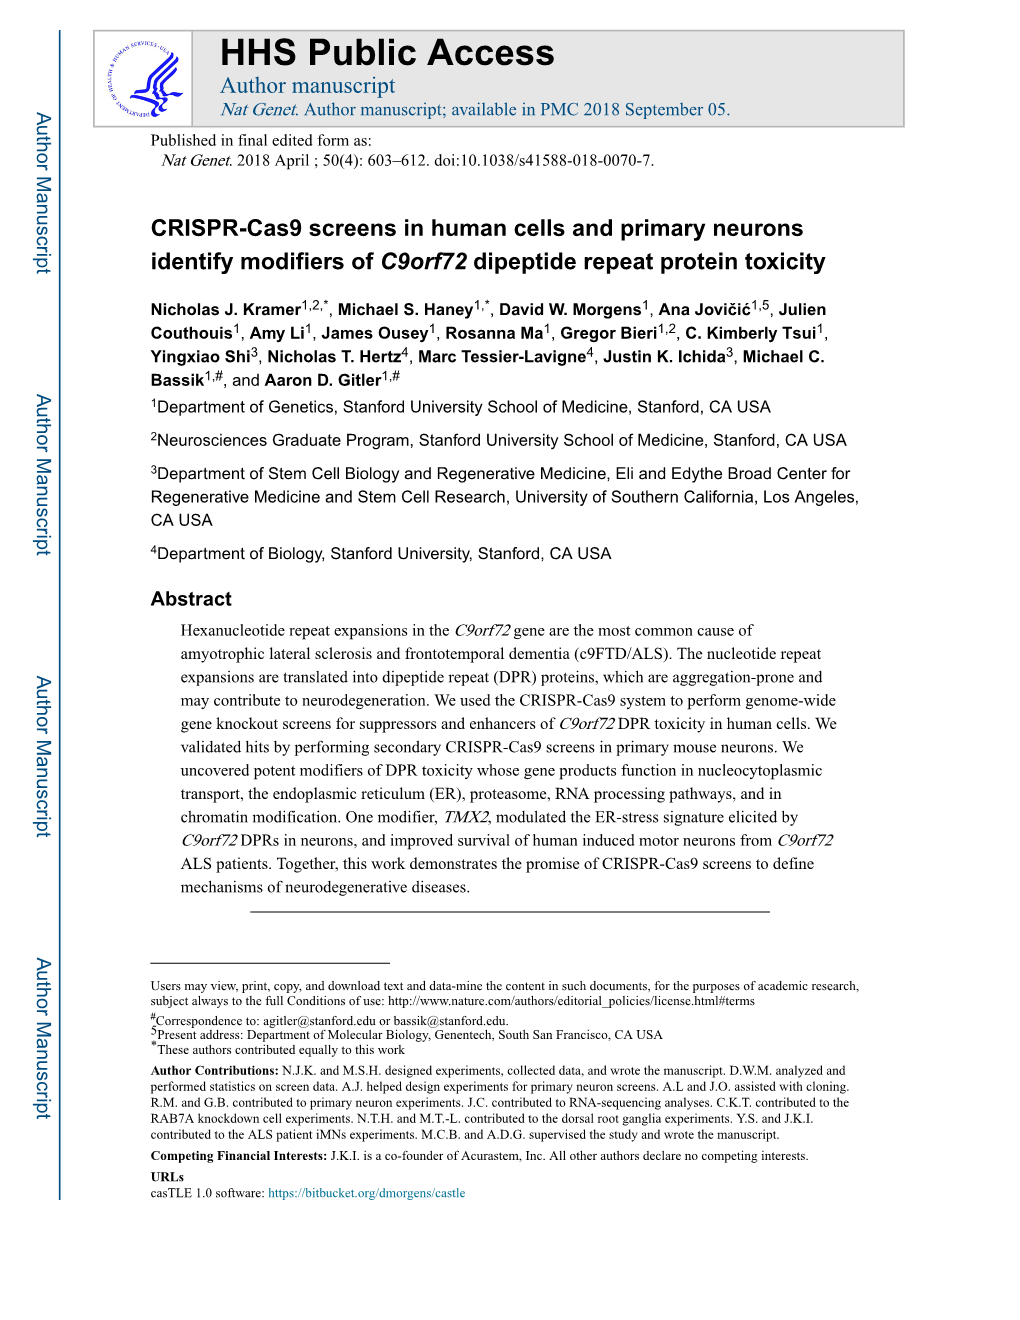 CRISPR-Cas9 Screens in Human Cells and Primary Neurons Identify Modifiers of C9orf72 Dipeptide Repeat Protein Toxicity